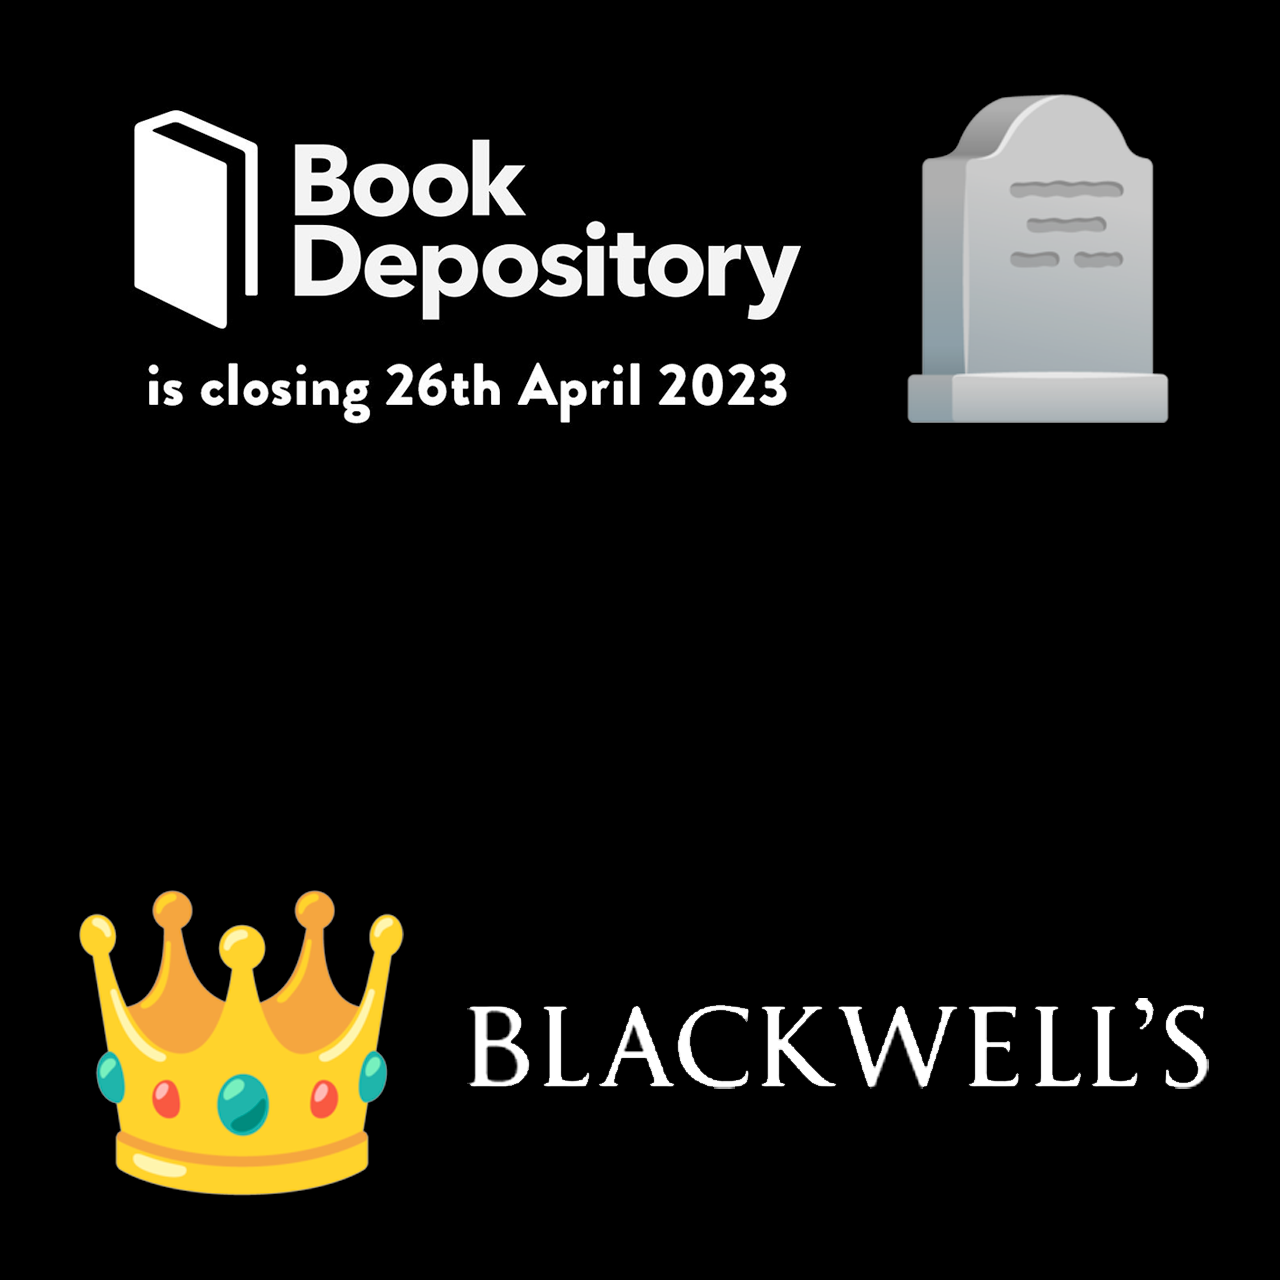 A poster. On the upper half: a headstone emoji next to the Book Depository logo and the closing date of April 26, 2023. On the lower half: a crown emoji and the Blackwell's logo